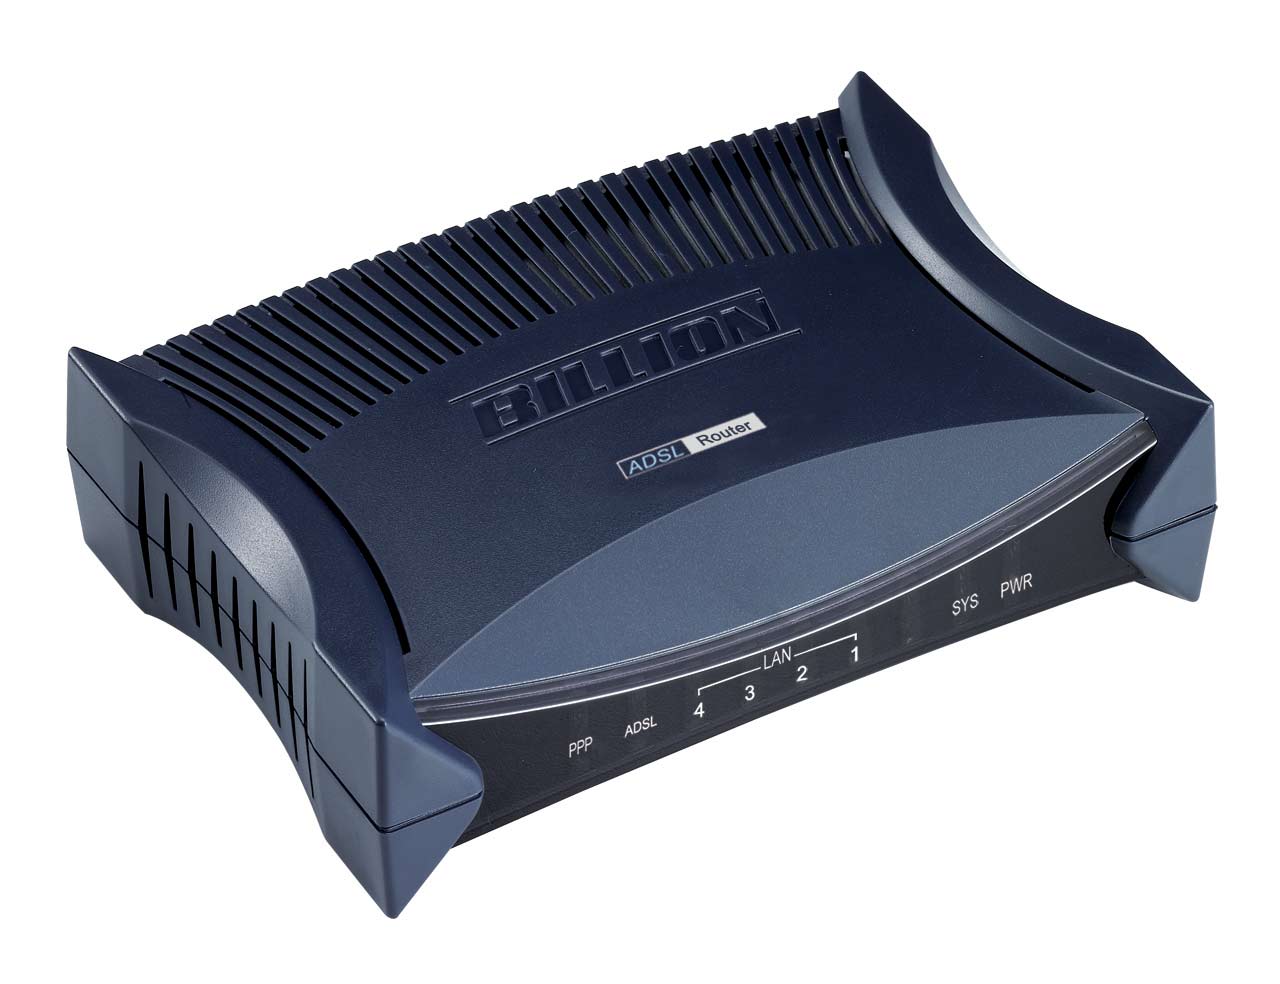 Network Router 7300M